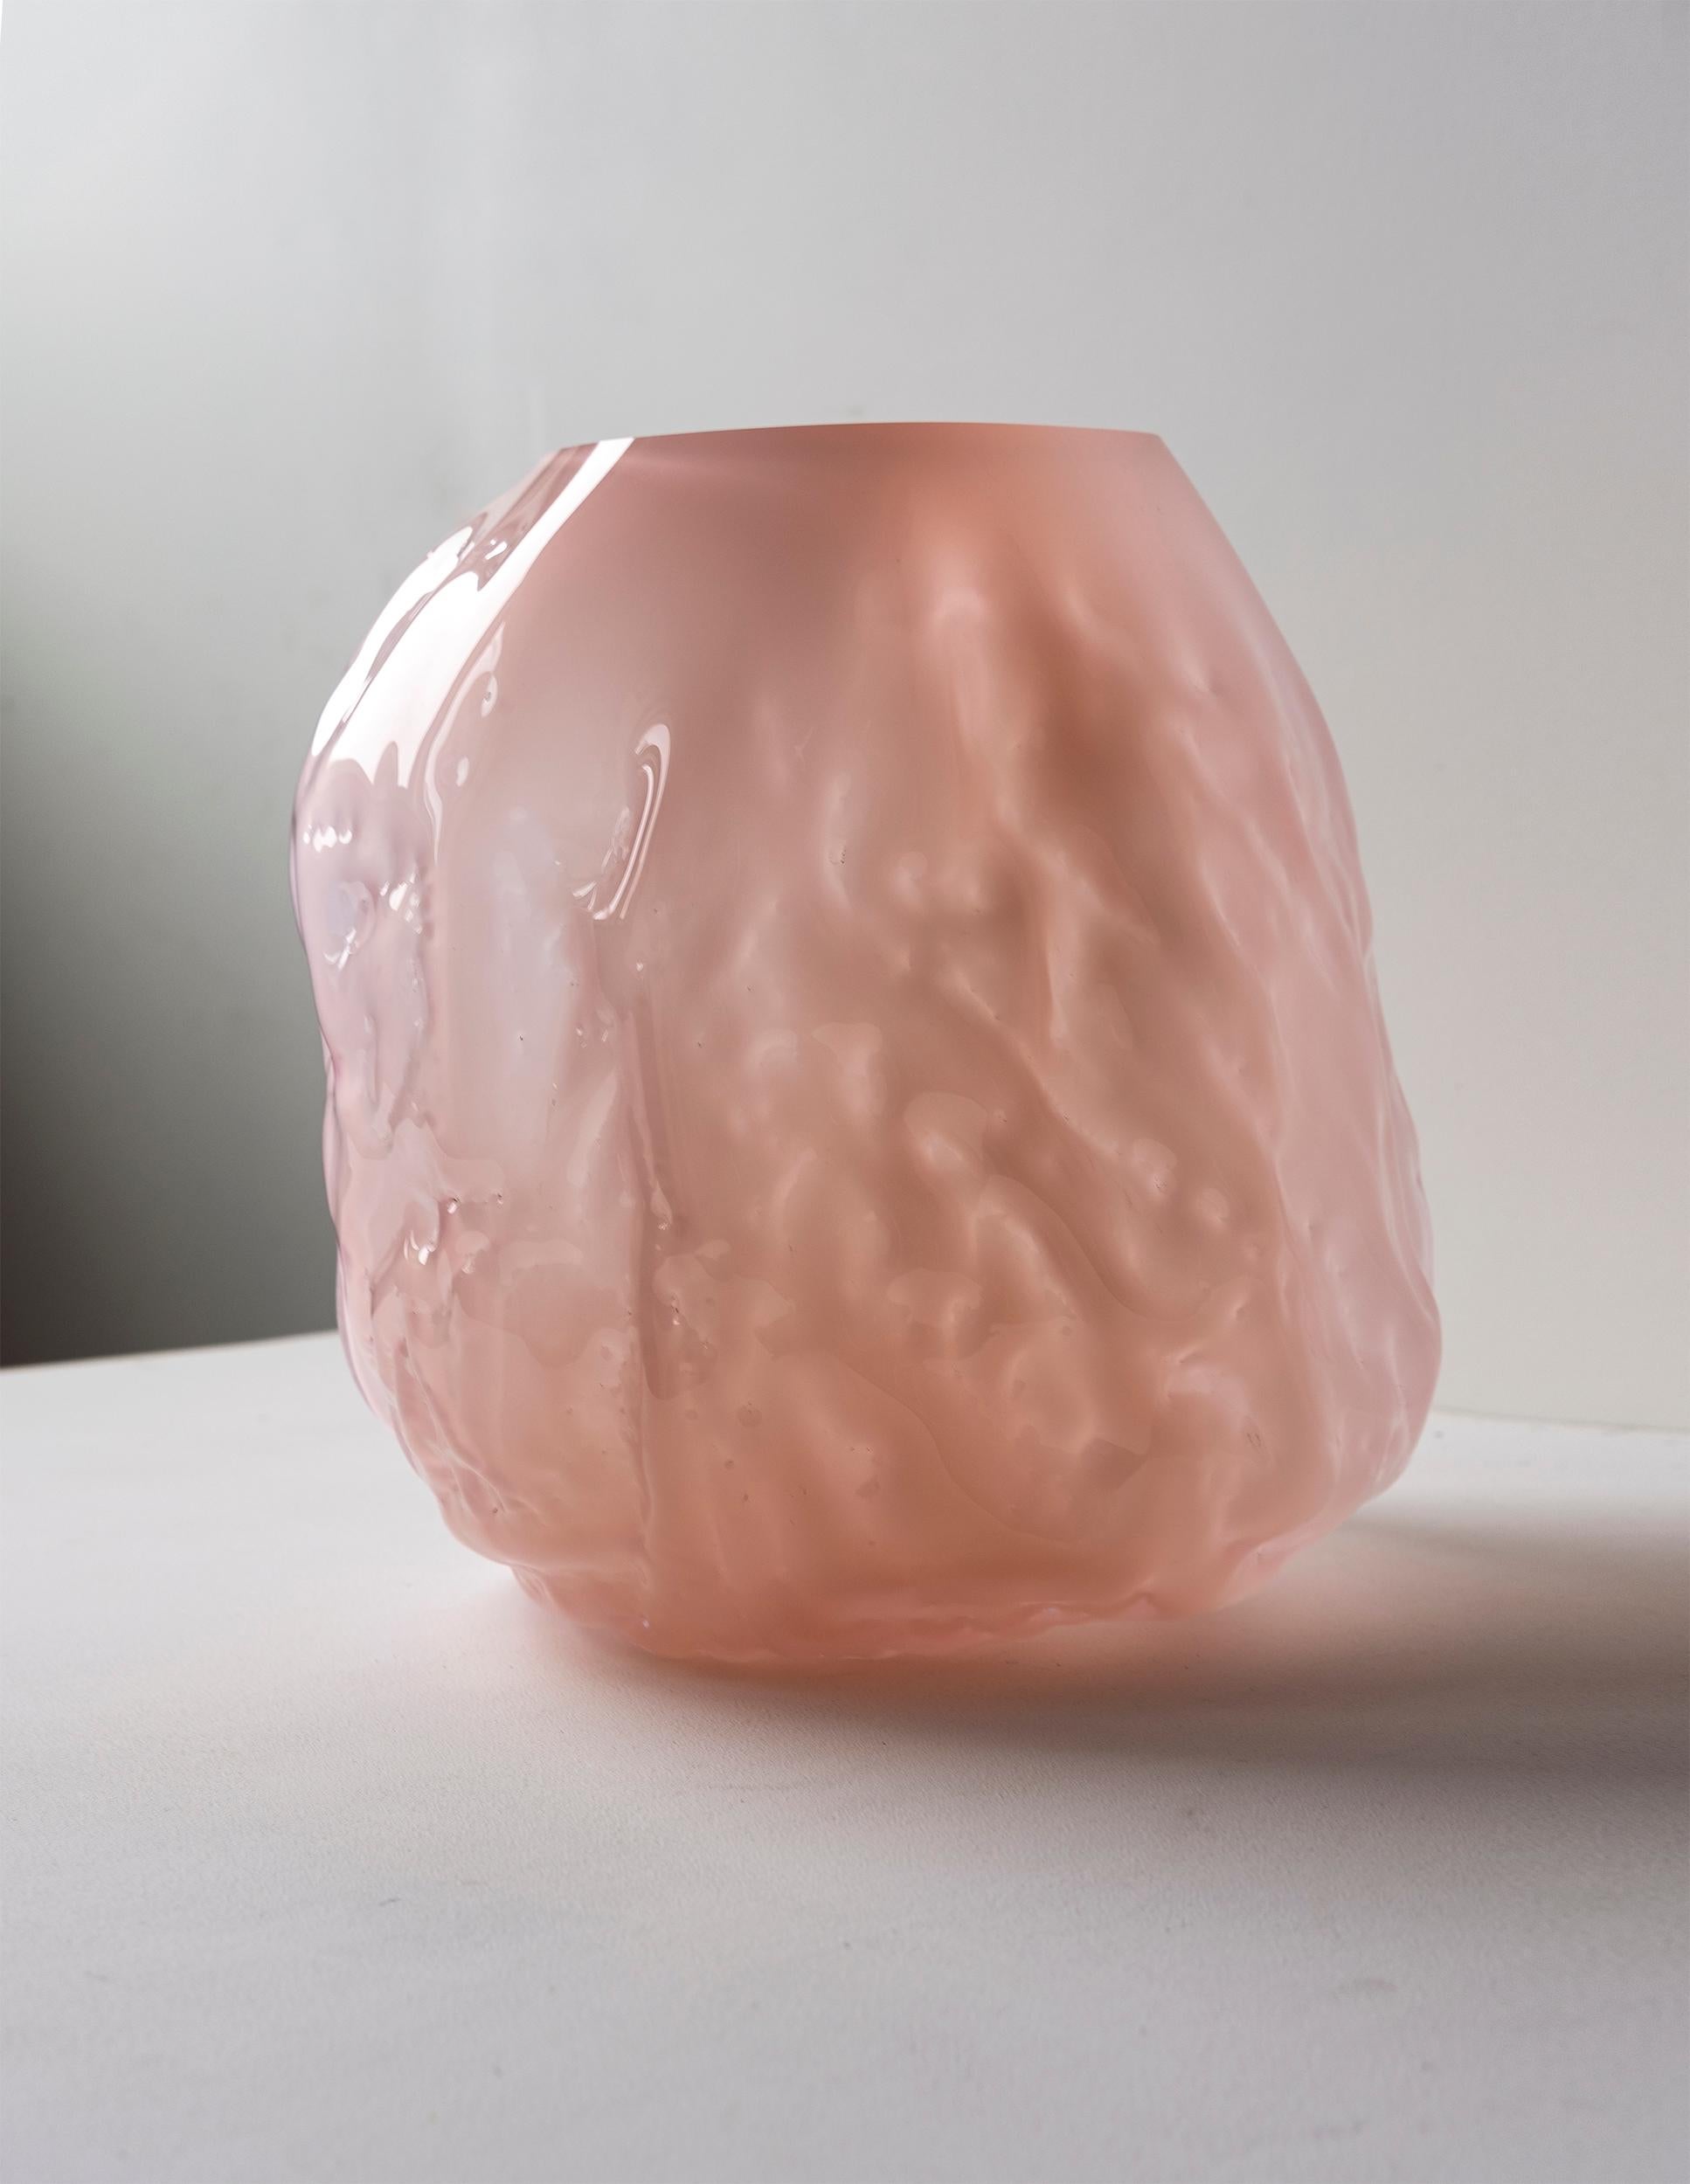 Hand blown glass vase made in forms of soft clay that are shaped by hand just before blowing the glass into the form. The process makes all pieces unique and gives them a wrinkled surface. NOTE, small parts of clay from the production might be